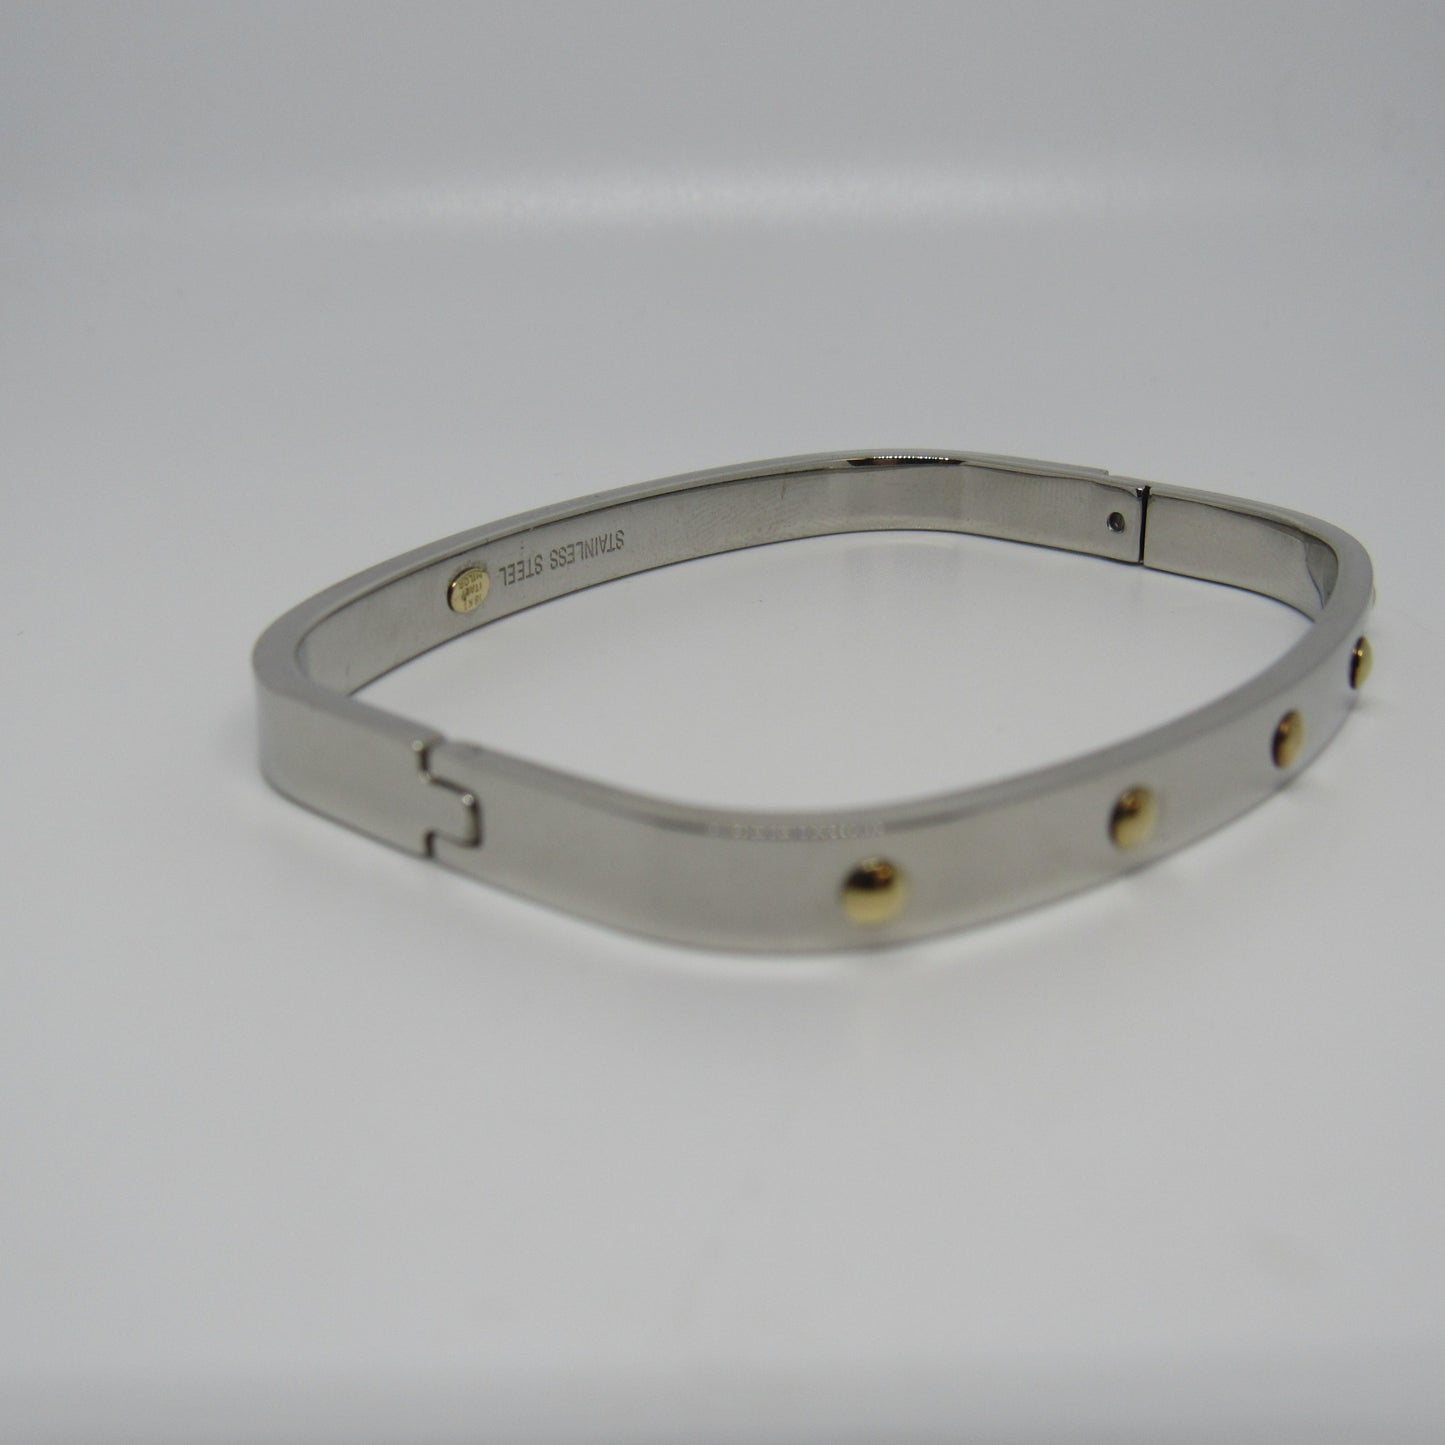 Milor Stainless Steel Bangle Bracelet 18K Yellow Gold Accents Italy Hinged - 7 in